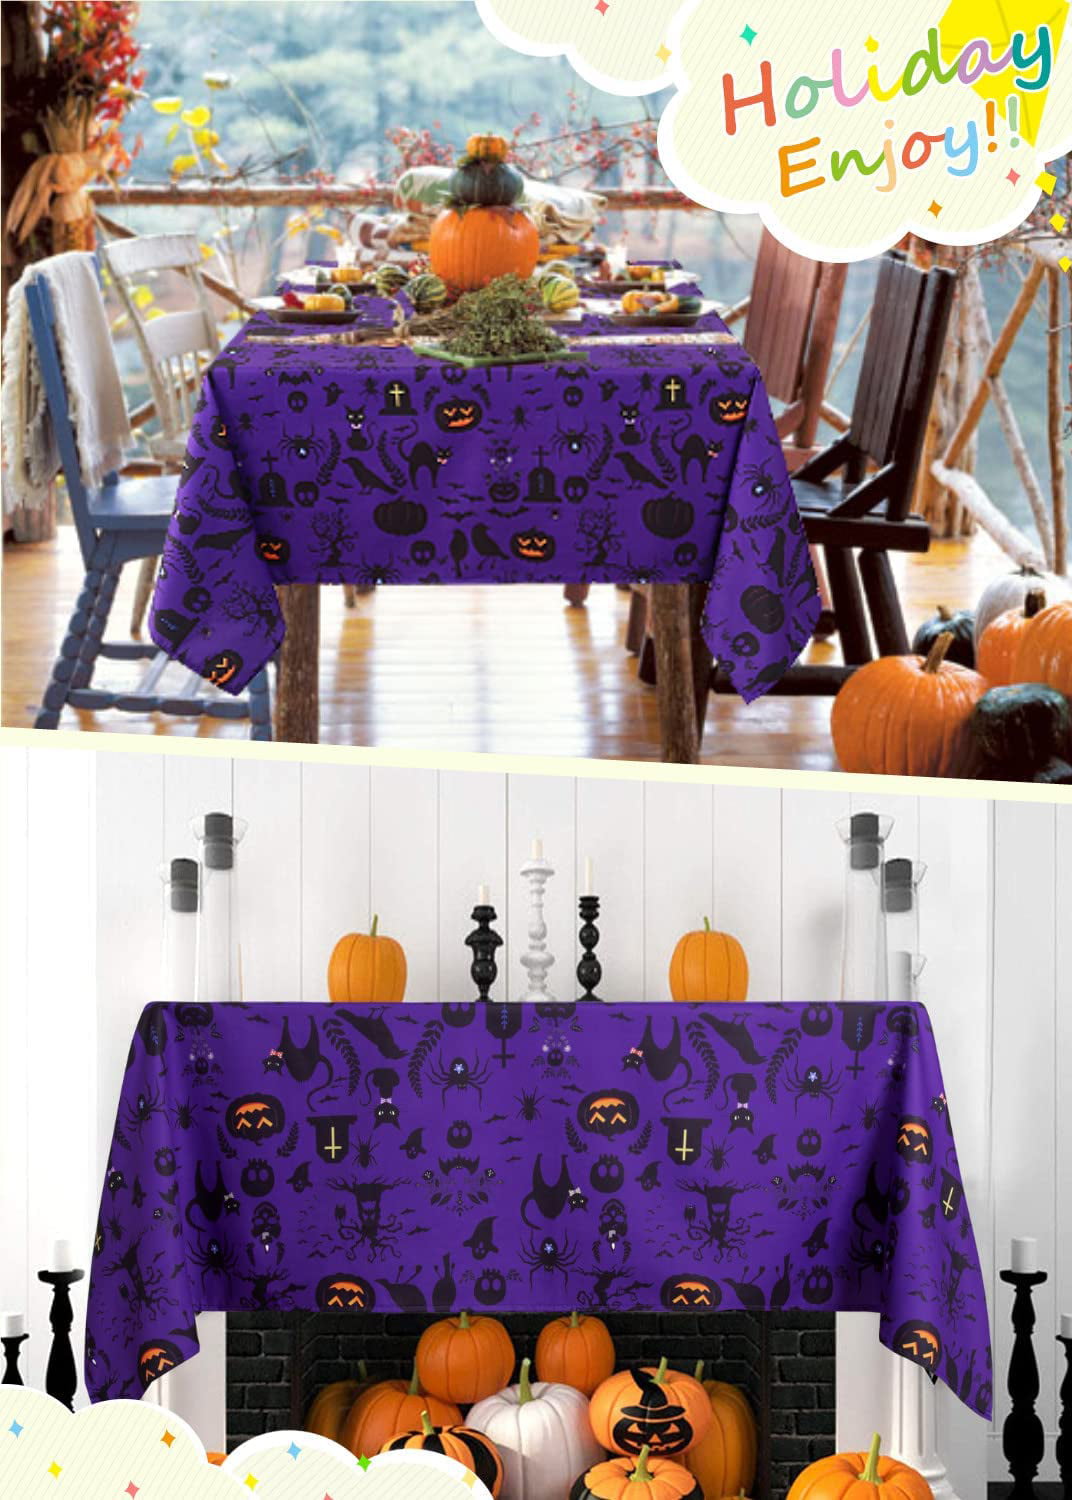 Halloween Tablecloth 57x120 Inches Purple Tablecloths Rectangle Pumpkin Table Cloth Bat Printed Table Cover for Dinner Party Decoration